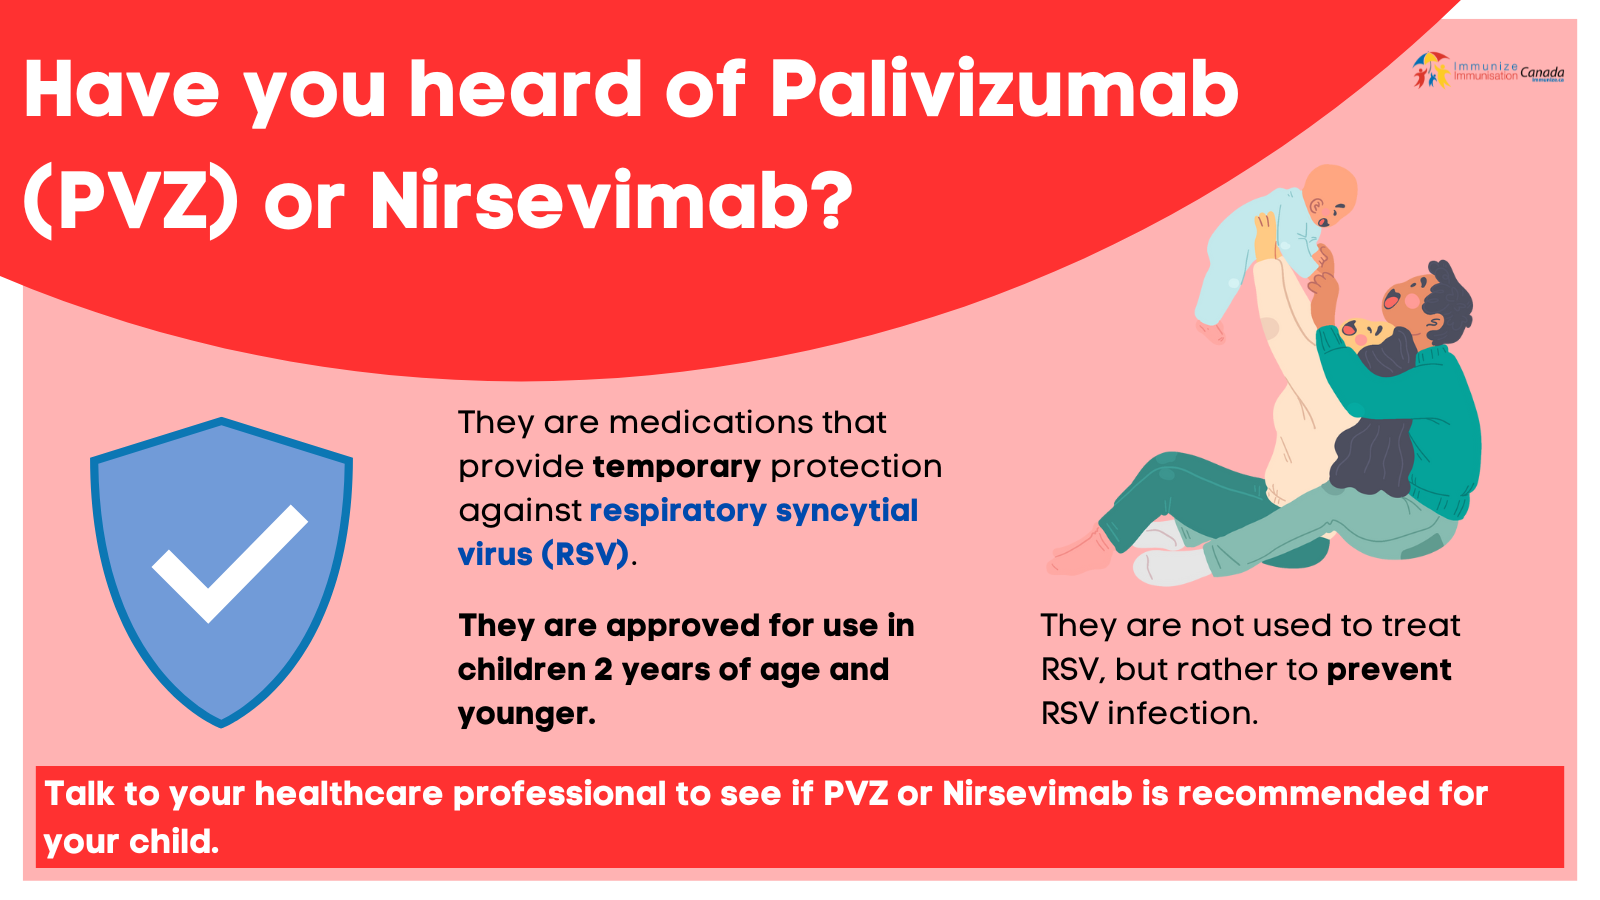 Have you heard of Palivizumab (PVZ) or Nirsevimab? - social media image for Twitter